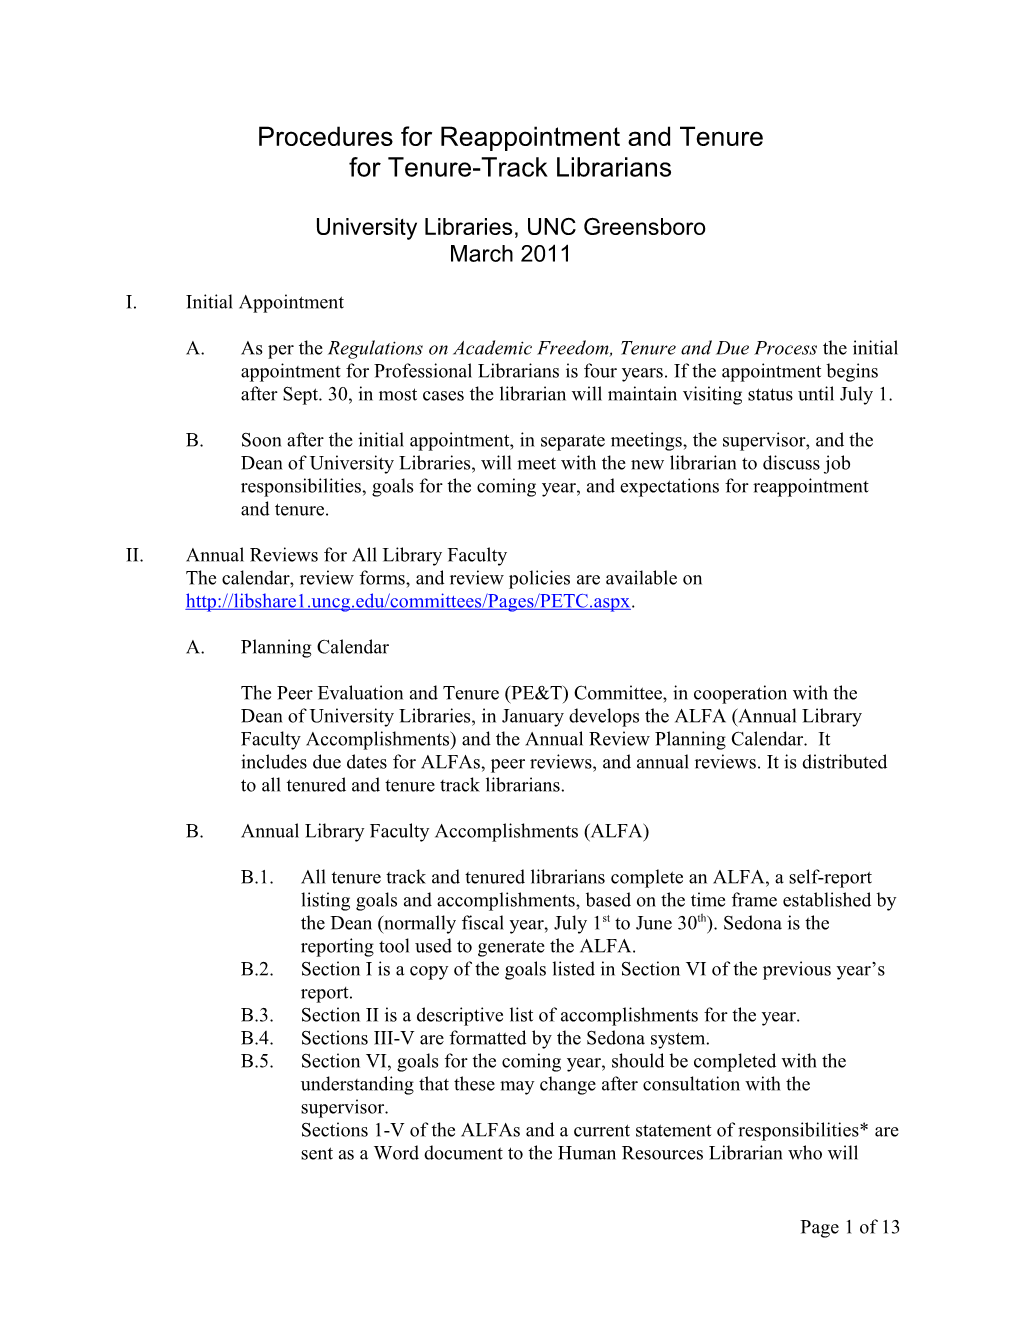 Procedures for Reappointment, Tenure, and Post-Tenure Review